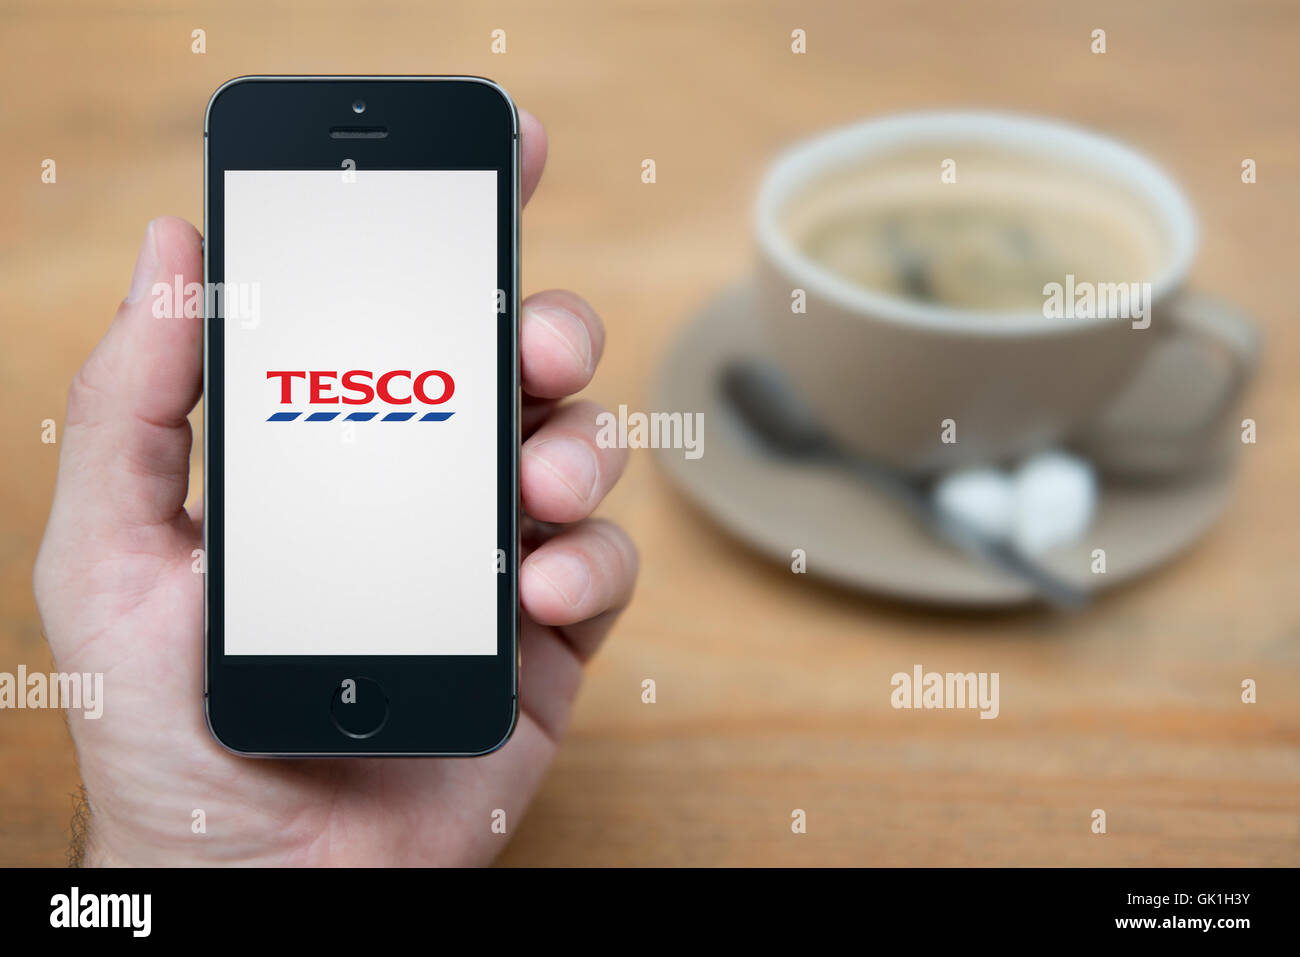 A man looks at his iPhone which displays the Tesco logo, while sat with a cup of coffee (Editorial use only). Stock Photo